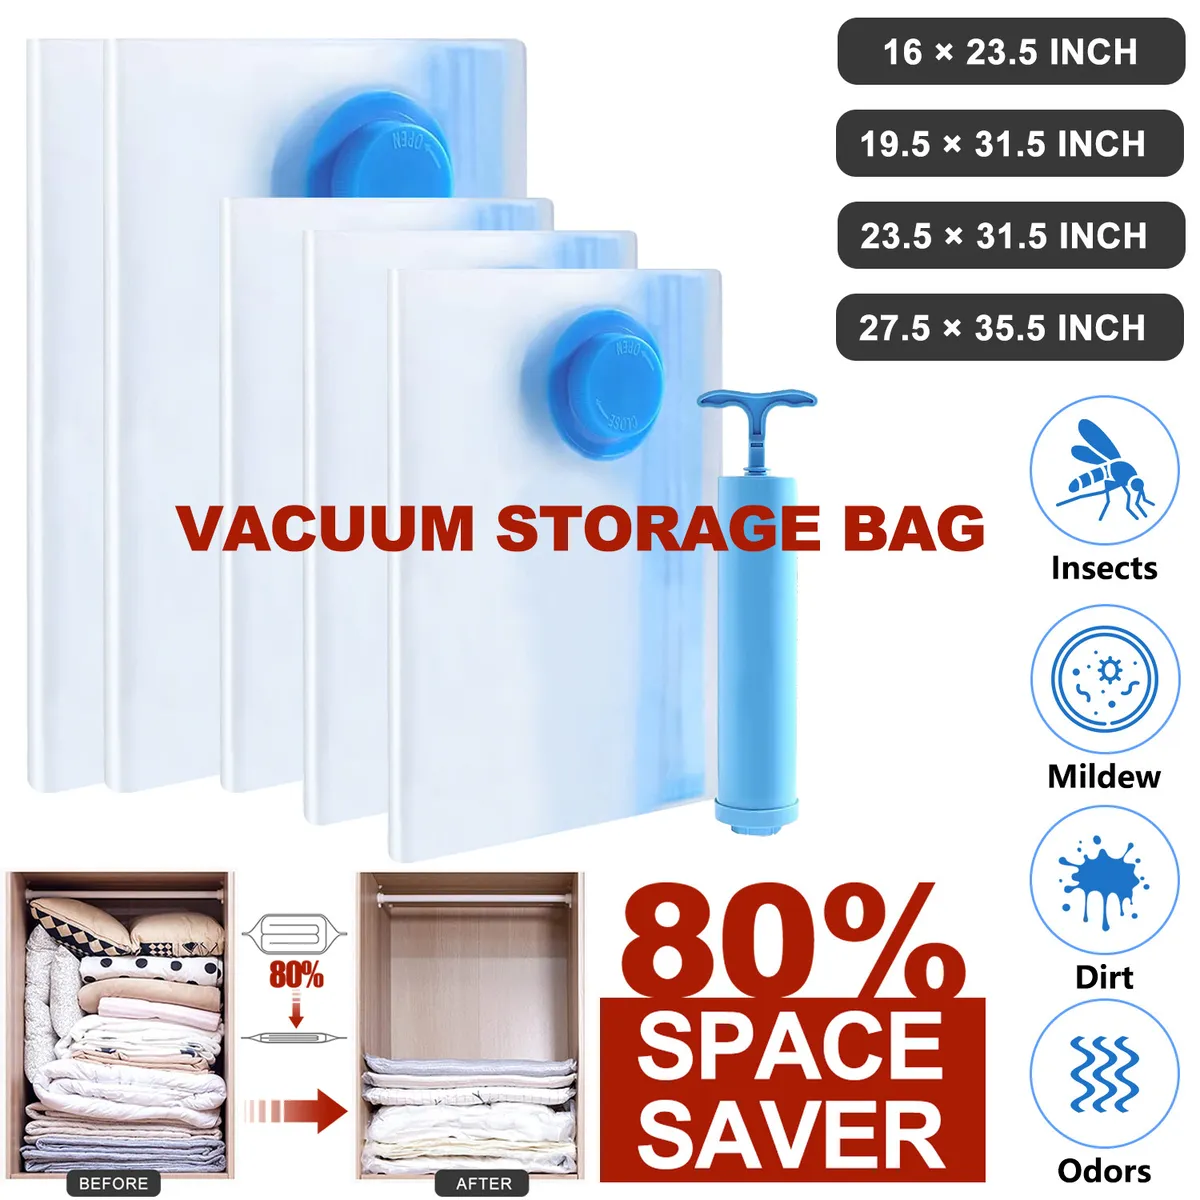 6 Medium Vacuum Storage Bags, Space Saver Bags Compression Storage Bags for  Comforters and Blankets, Vacuum Sealer Bags for Clothes Storage, Hand Pump  Included